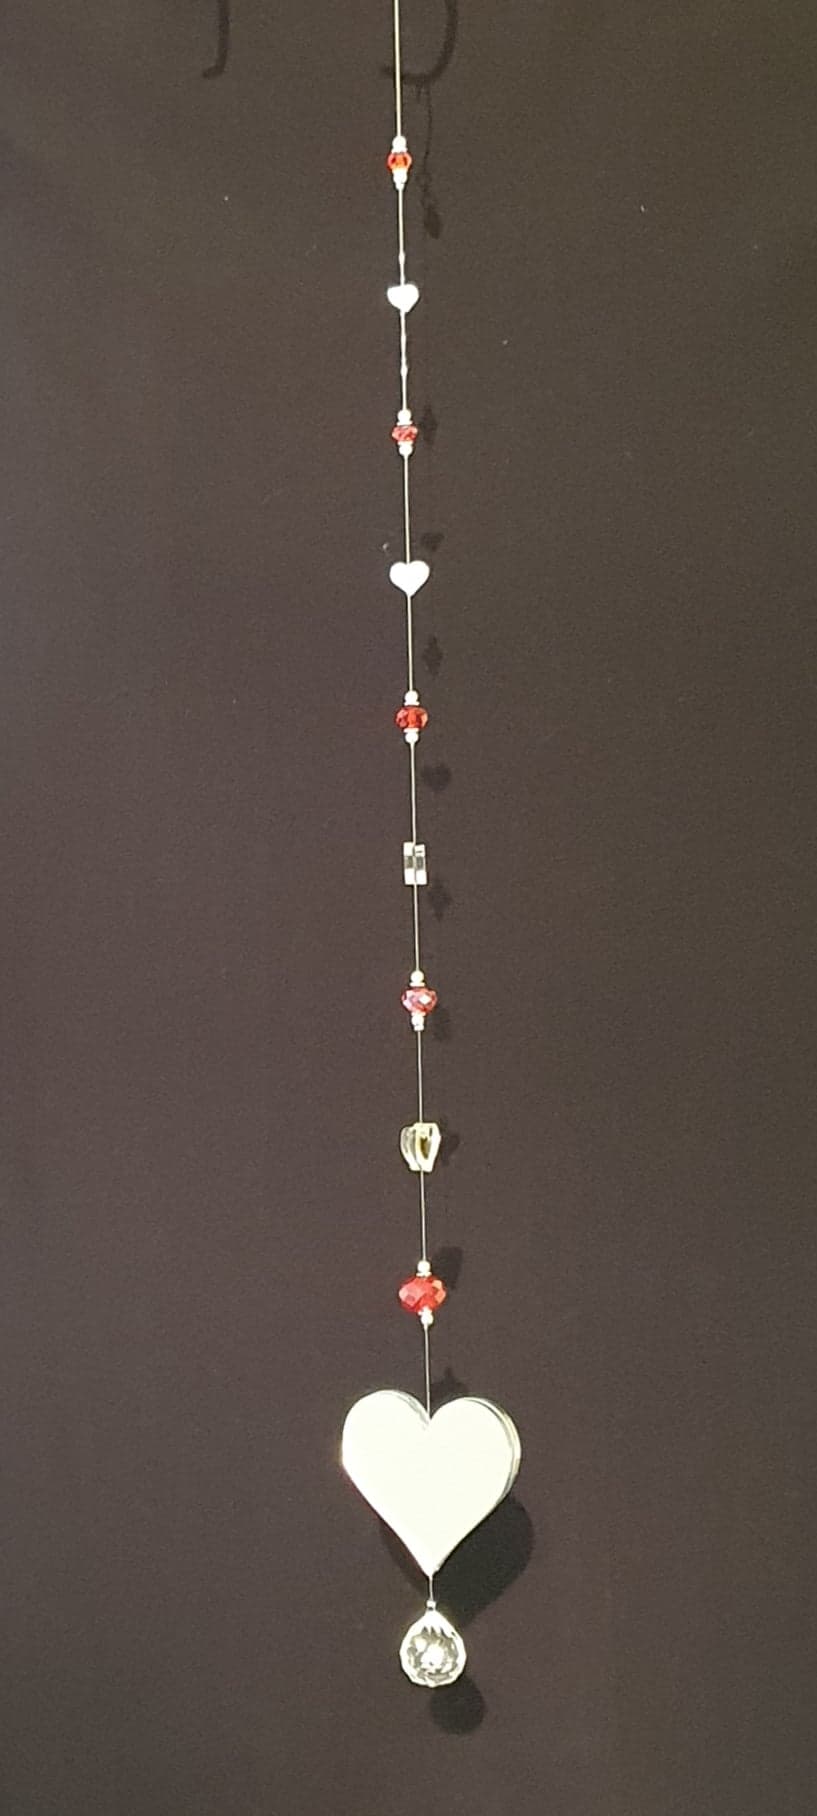 Heart mirrors with red faceted glass crystals. Single drop suncatcher